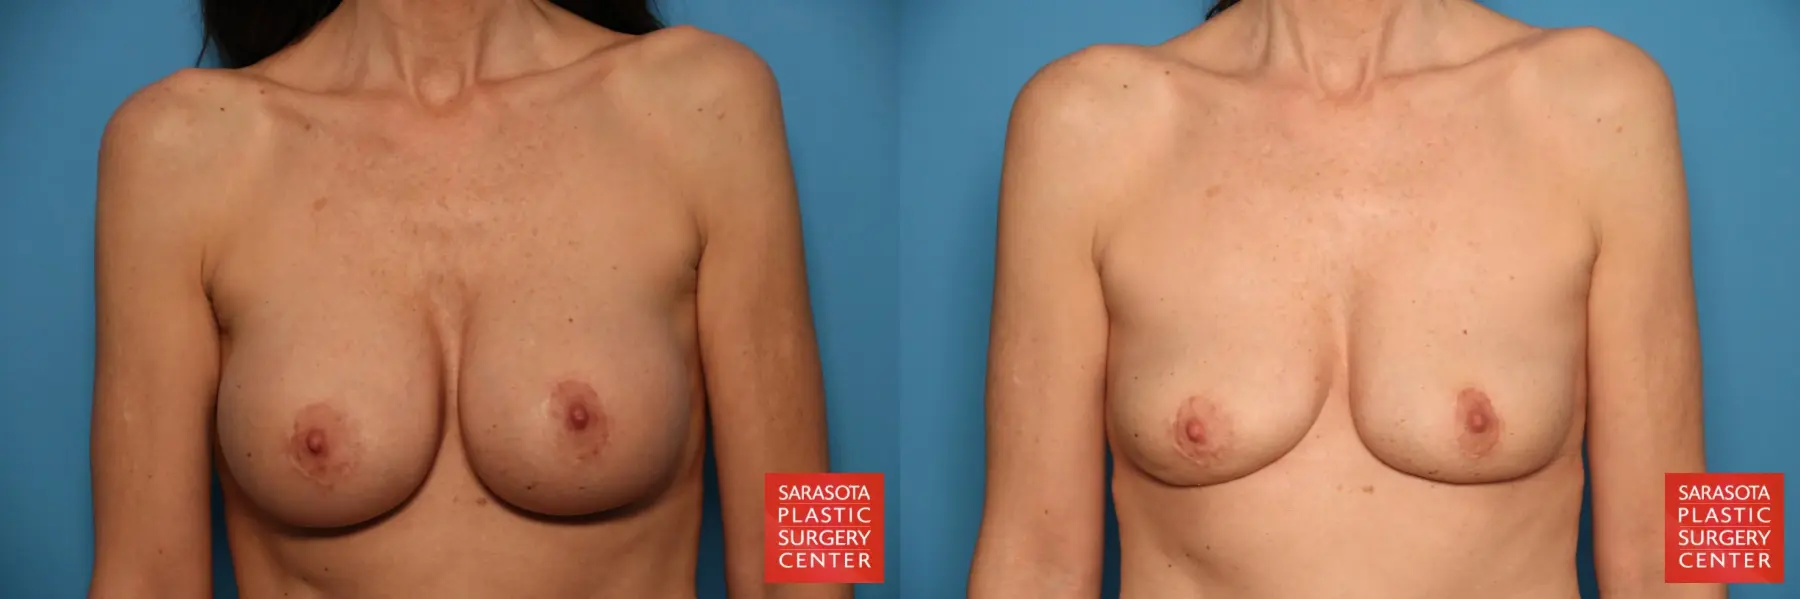 Breast Implant Removal: Patient 2 - Before and After  